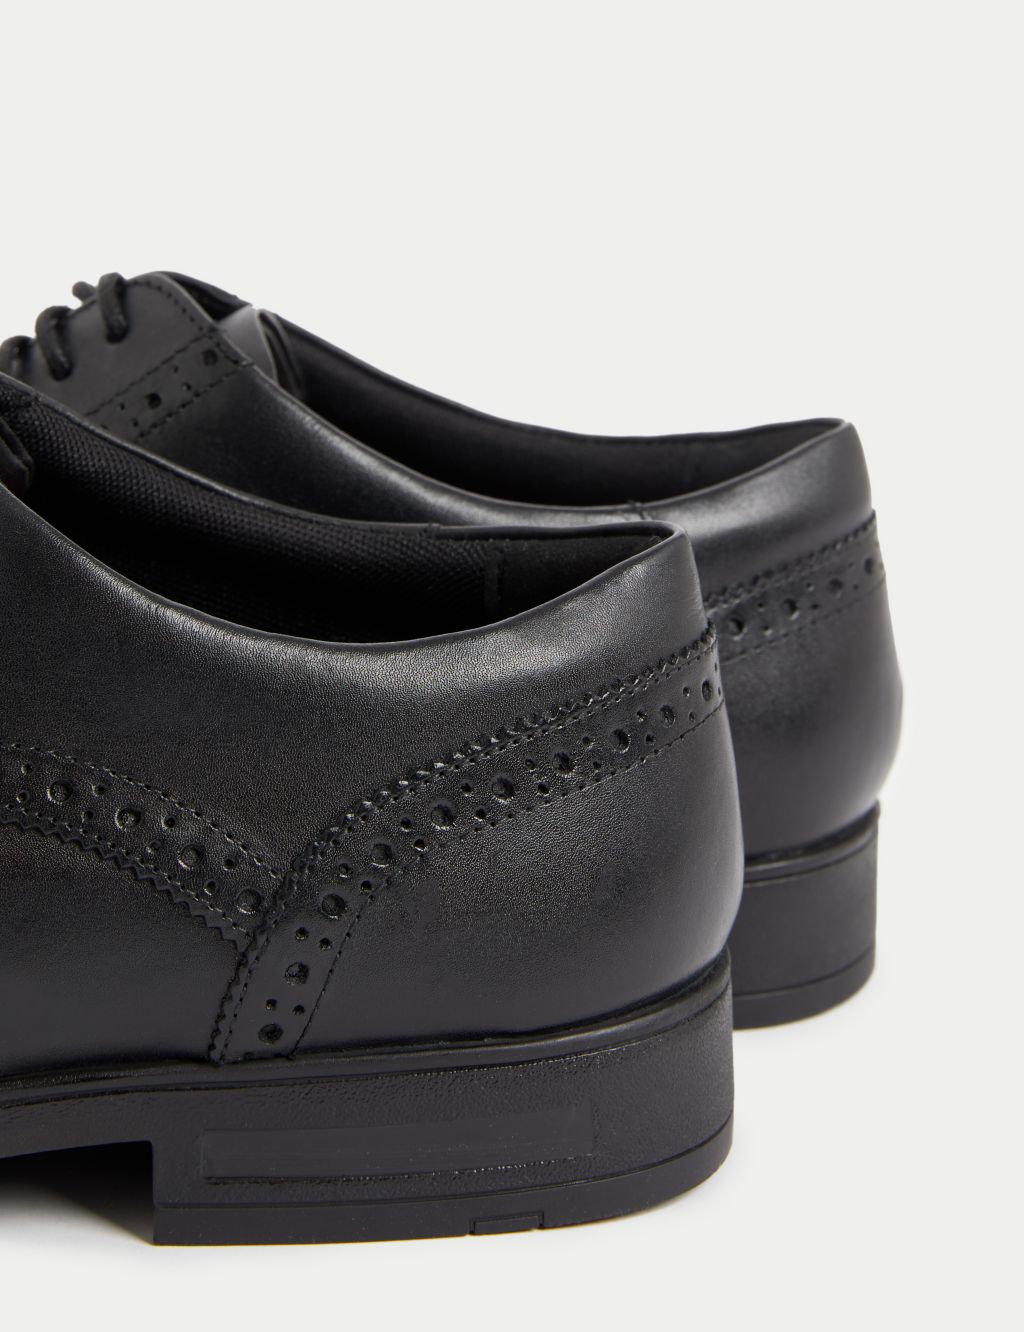 Wide Fit Airflex™ Leather Brogues image 3